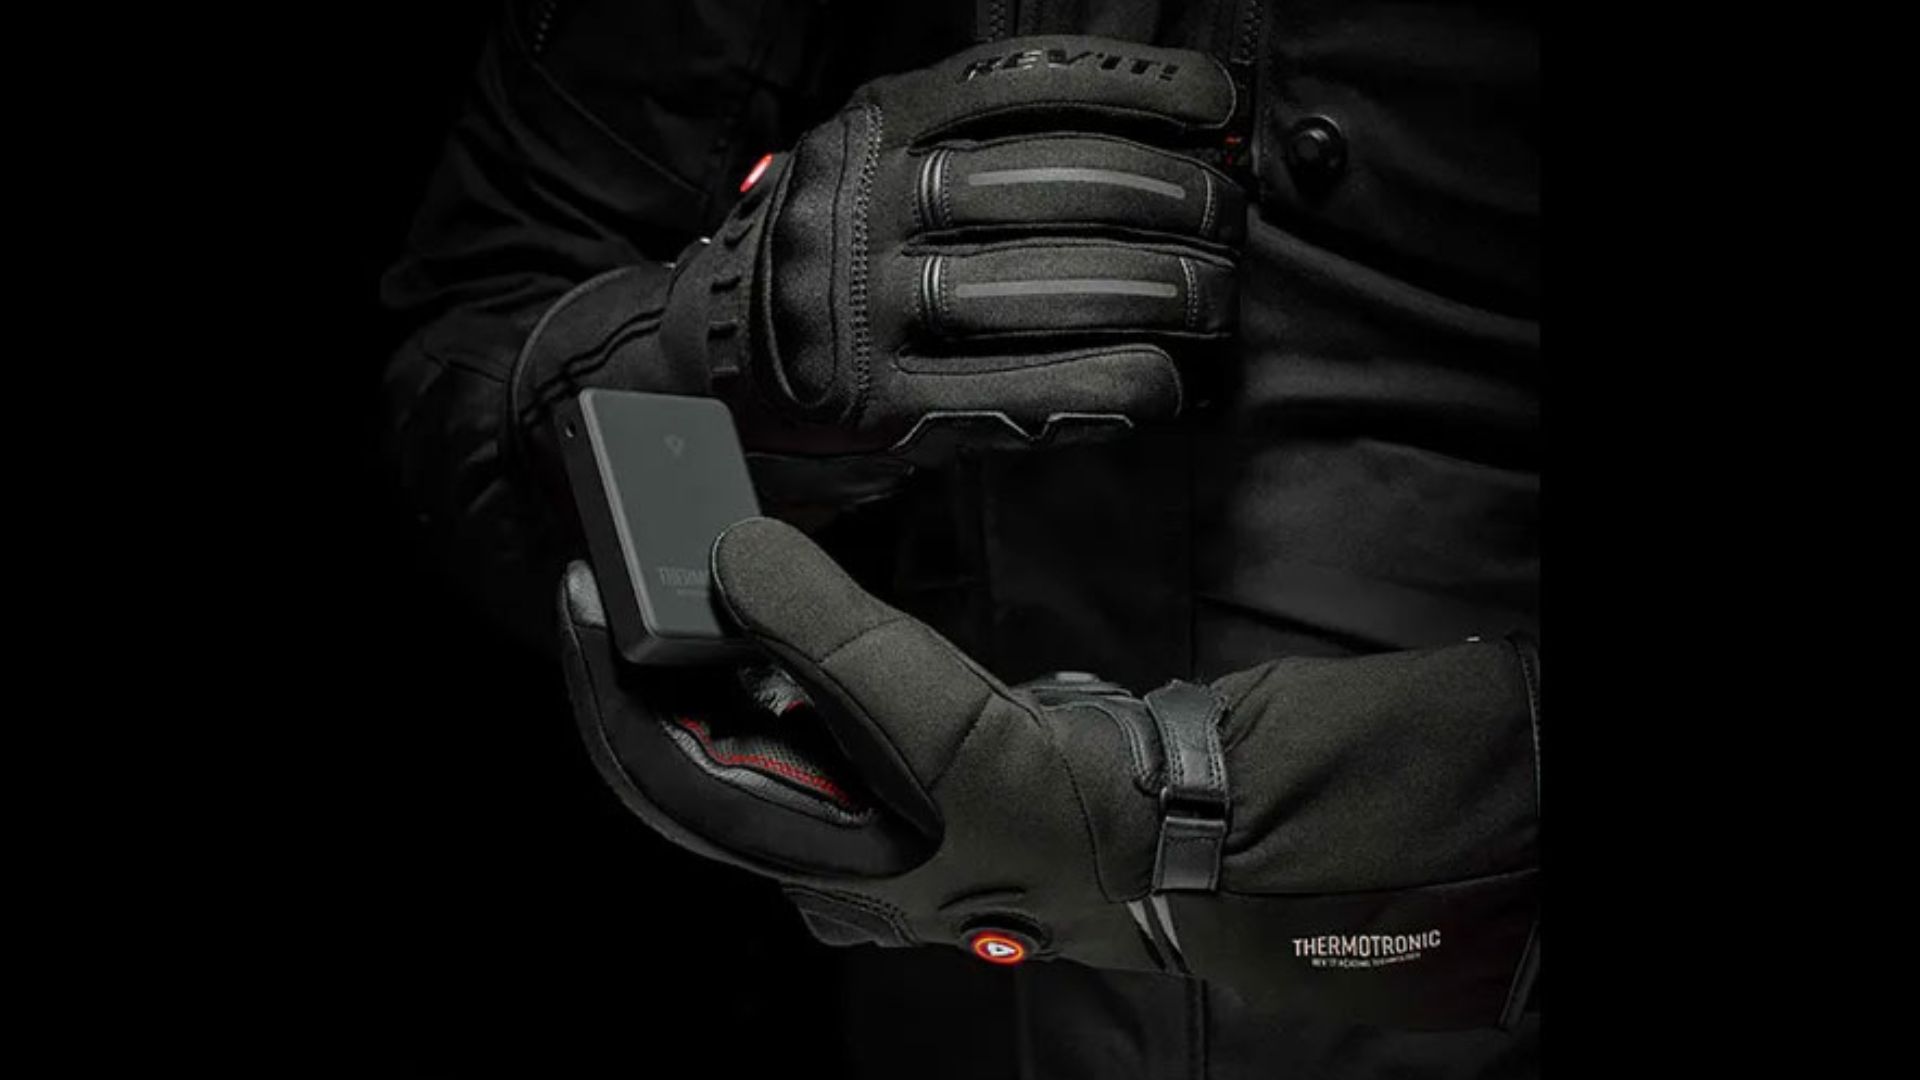 Rev'it! Launches New Gloves for Fall/Winter 2022